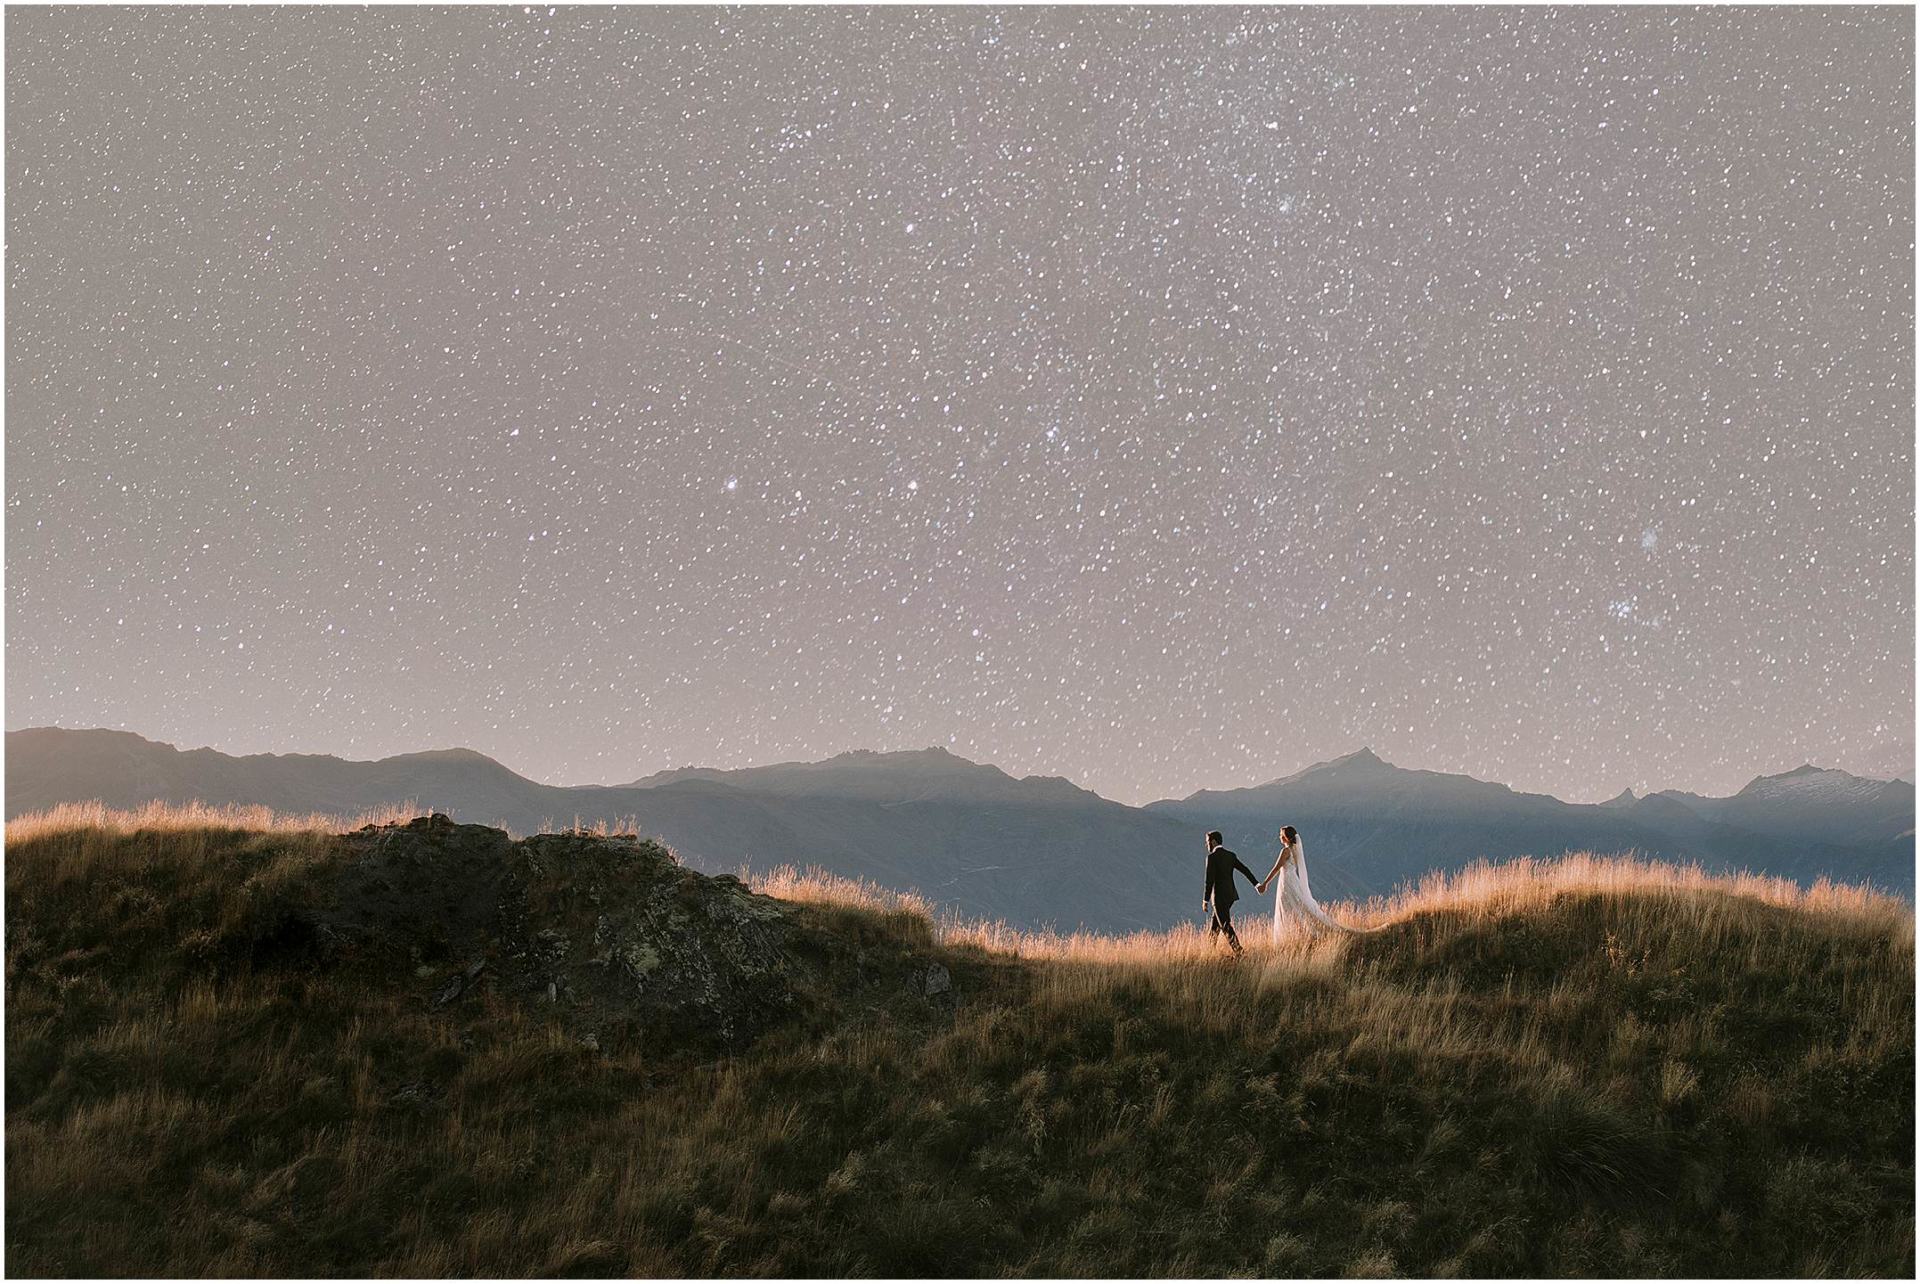 Charlotte Kiri Photography - Wedding Photography of a bride and groom holding hands and walking across undulating mountains with a backdrop of landscape and celestial sky behind them in Wanaka, New Zealand.